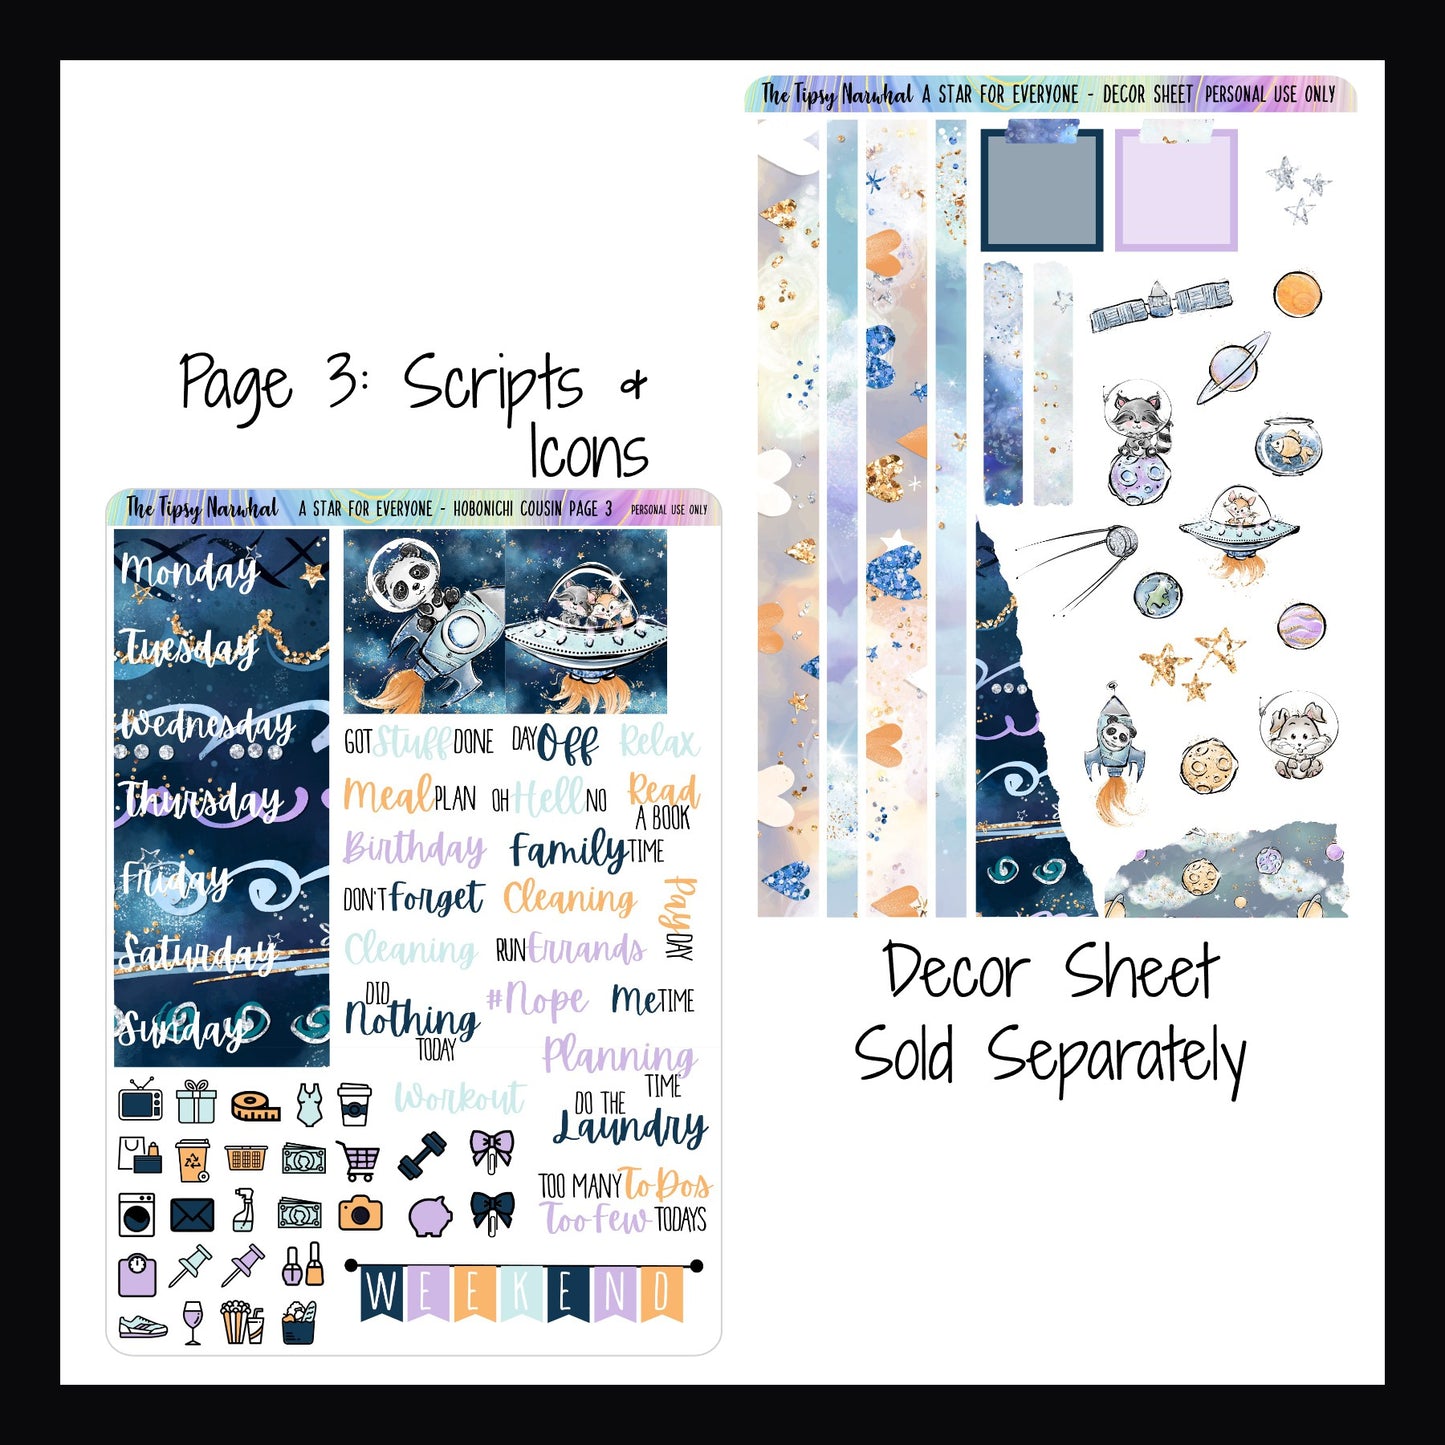 Digital A Star For Everyone Hobonichi Cousin Kit Page 3 features additional date covers, script stickers, weekend banner and daily icons.  The Decor sheet is sold separately and features various astronaut woodland animals.